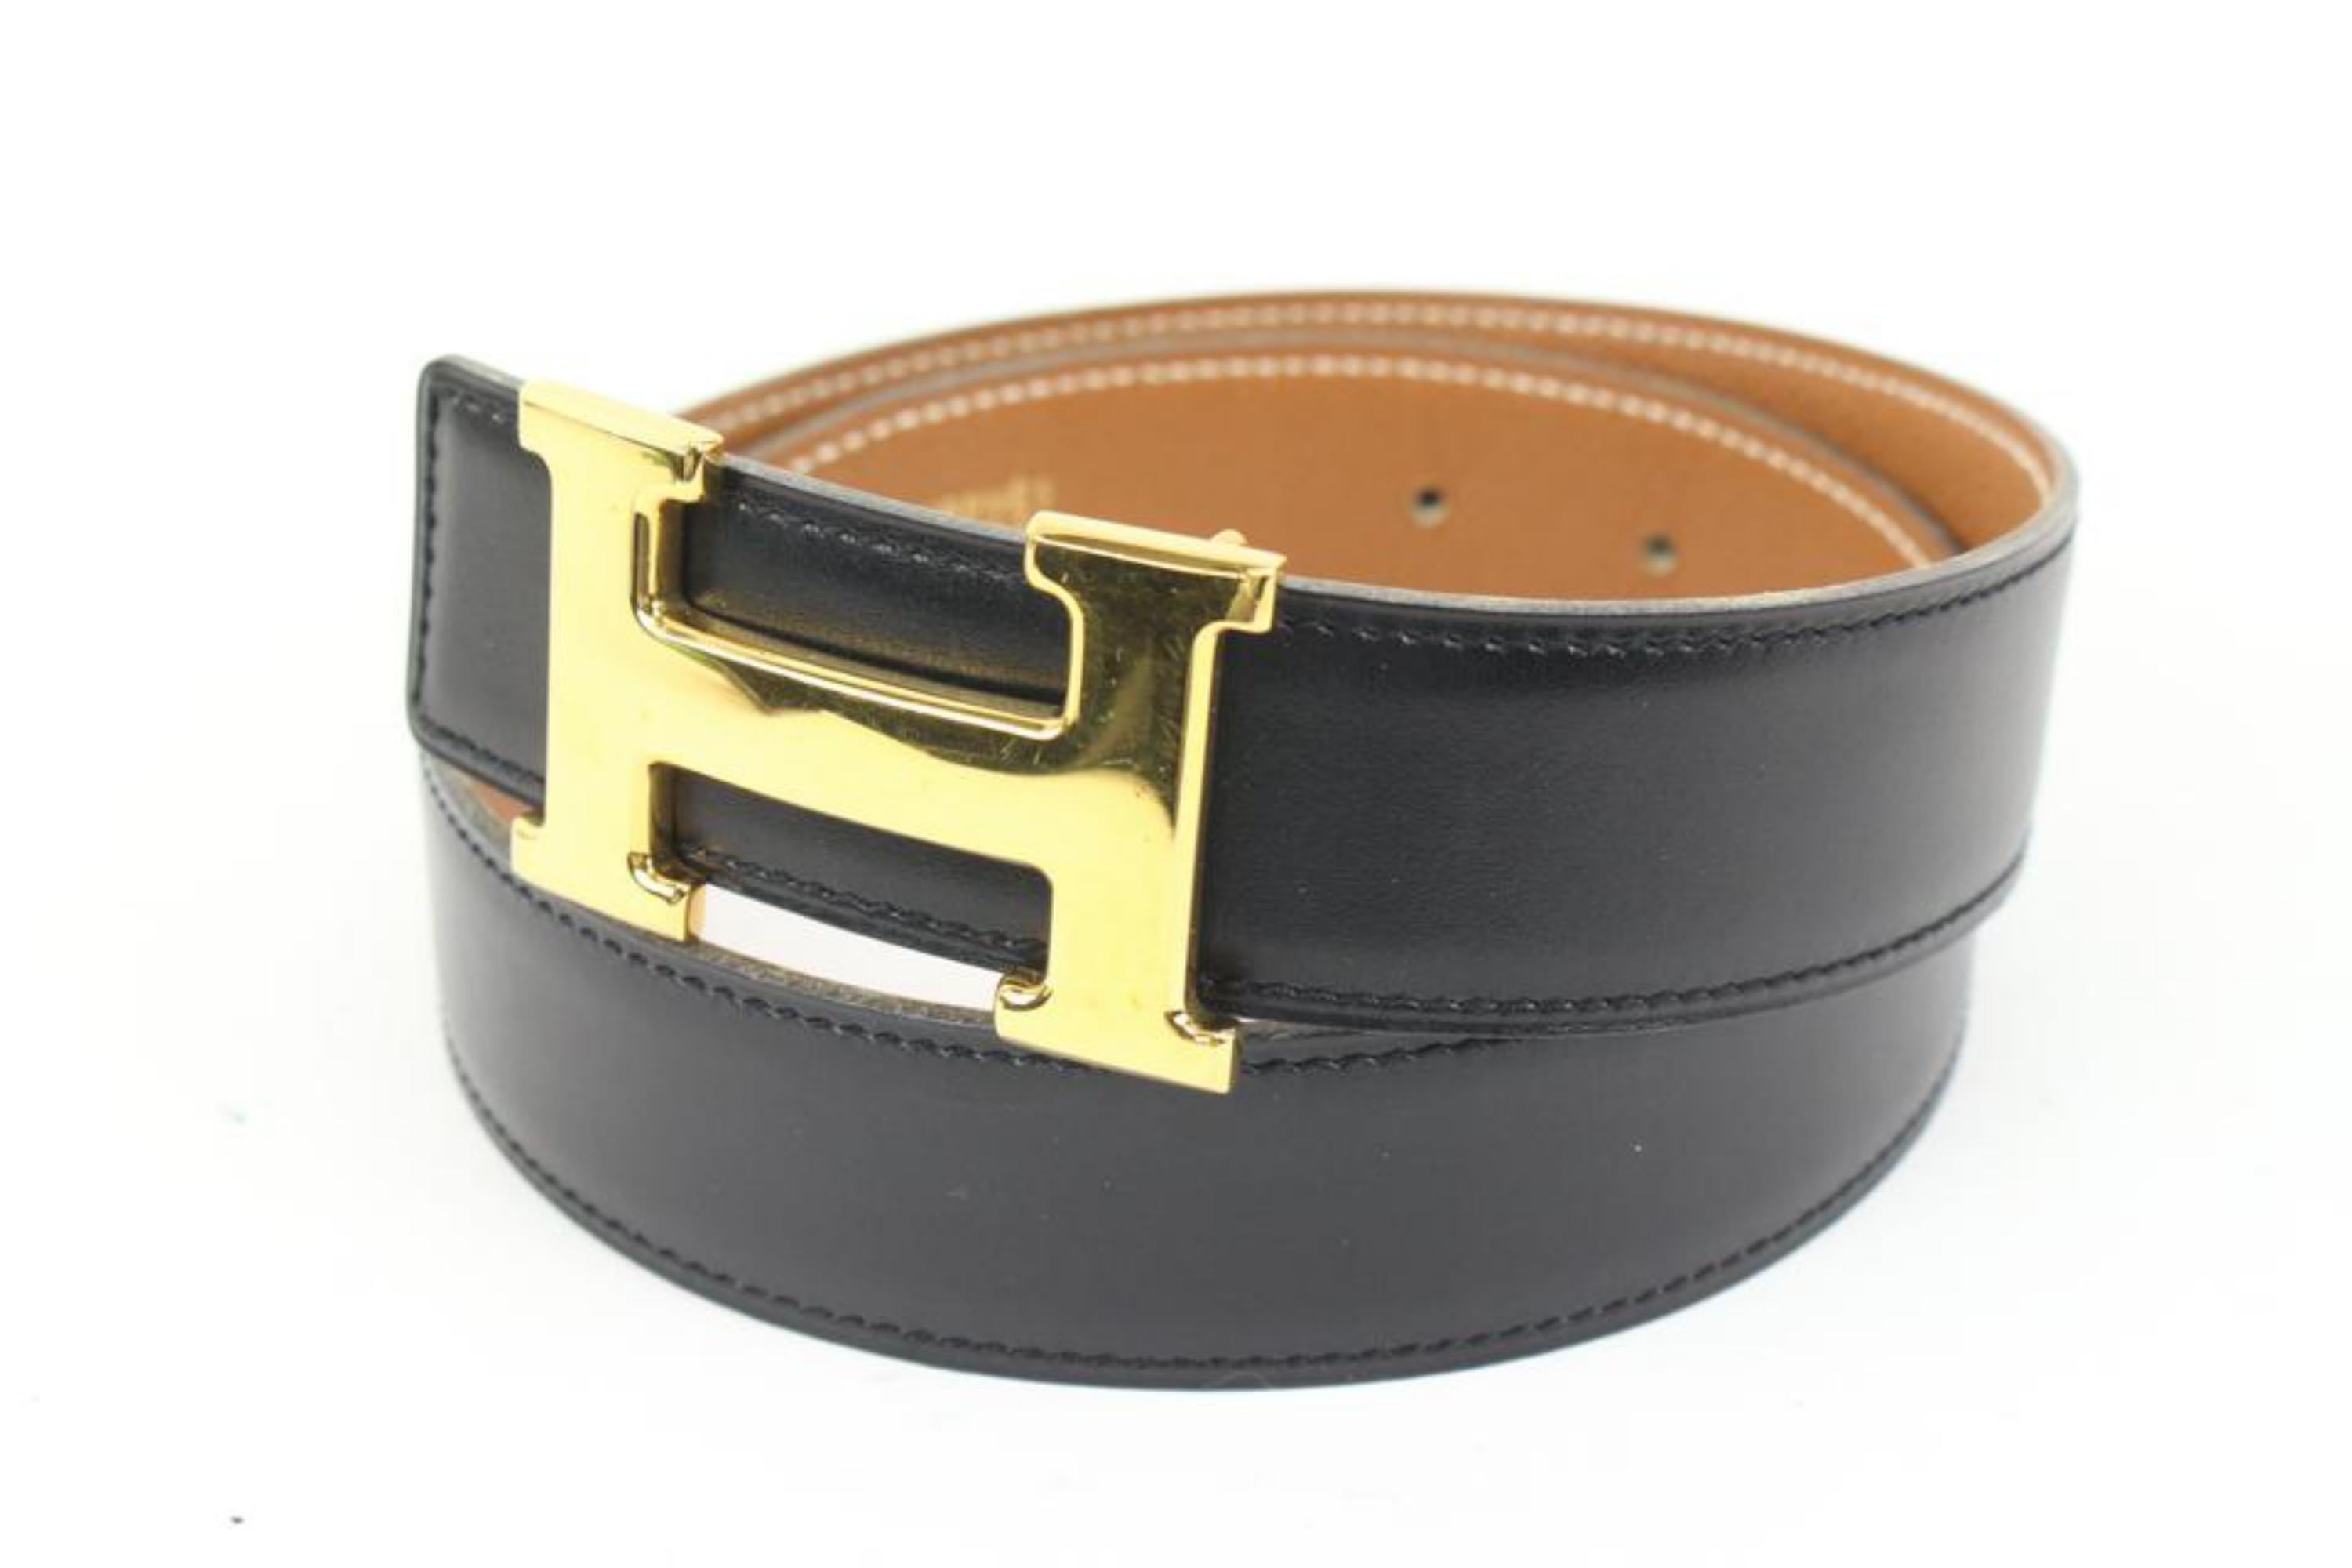 Hermès Black x Brown x Gold 32mm Reversible H Logo Belt Kit 49h421s
Date Code/Serial Number: A in a Square
Made In: France
Measurements: Length:  30